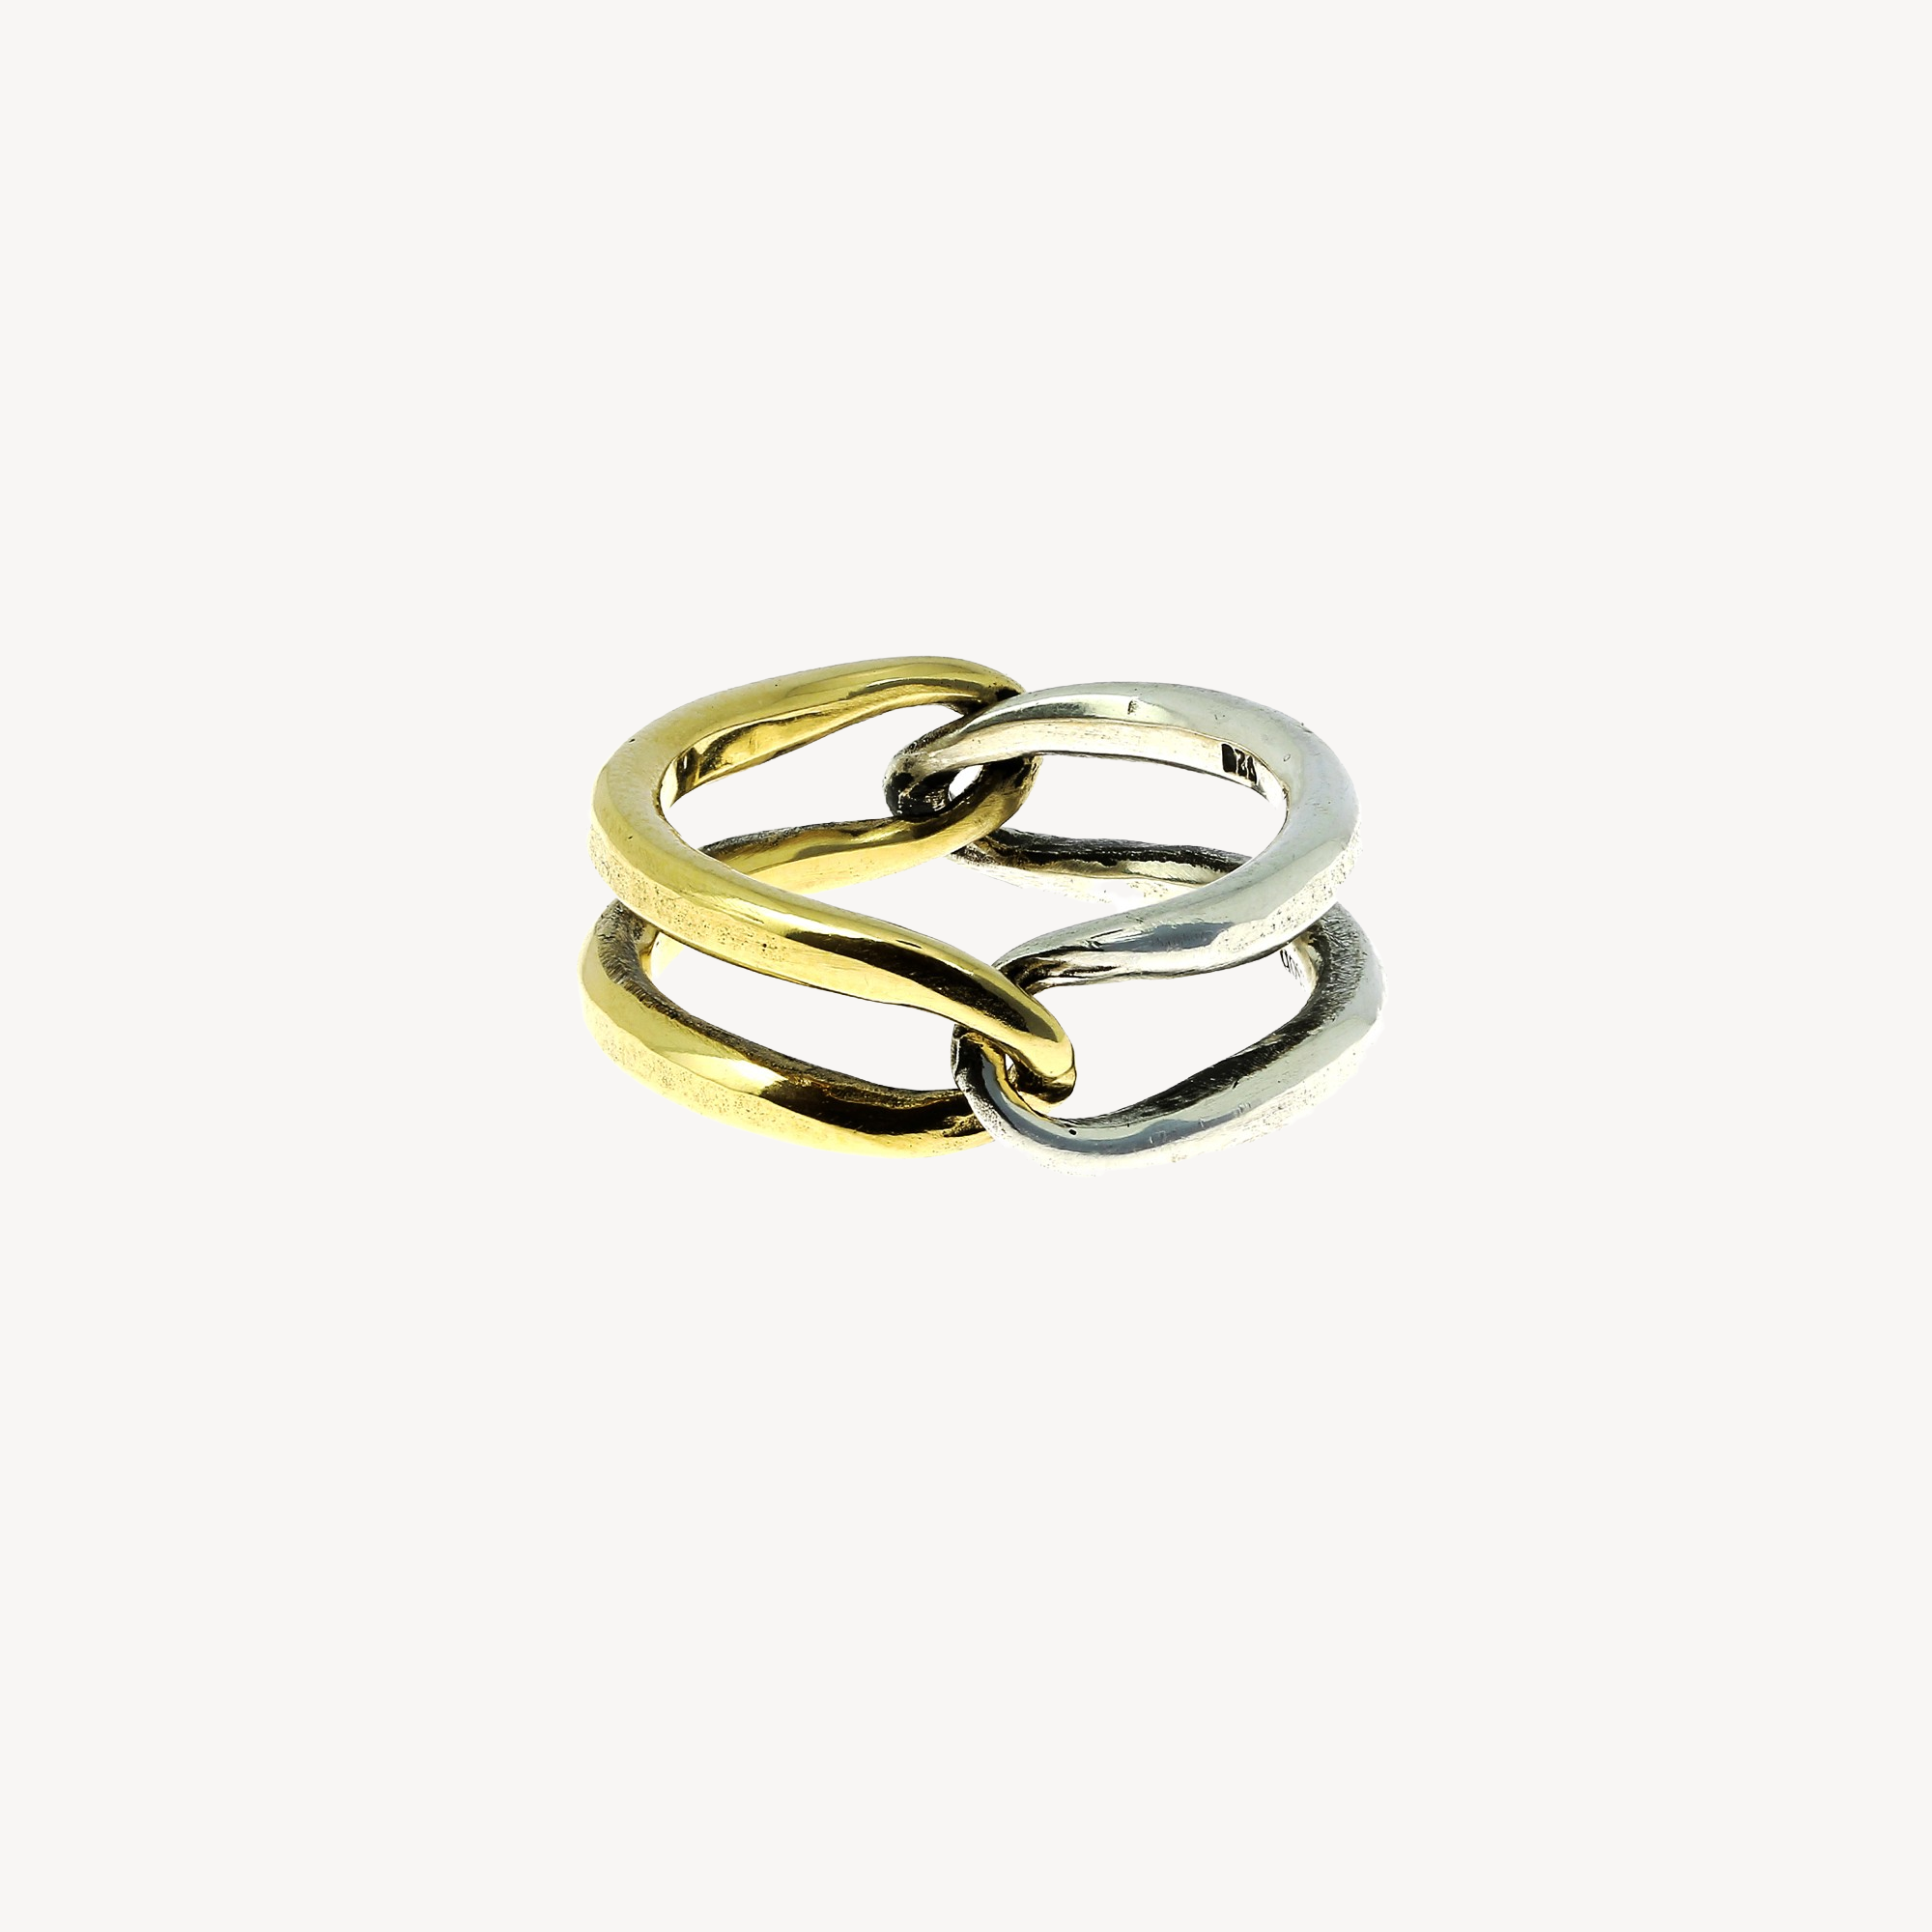 Silver and Gold Tension Ring